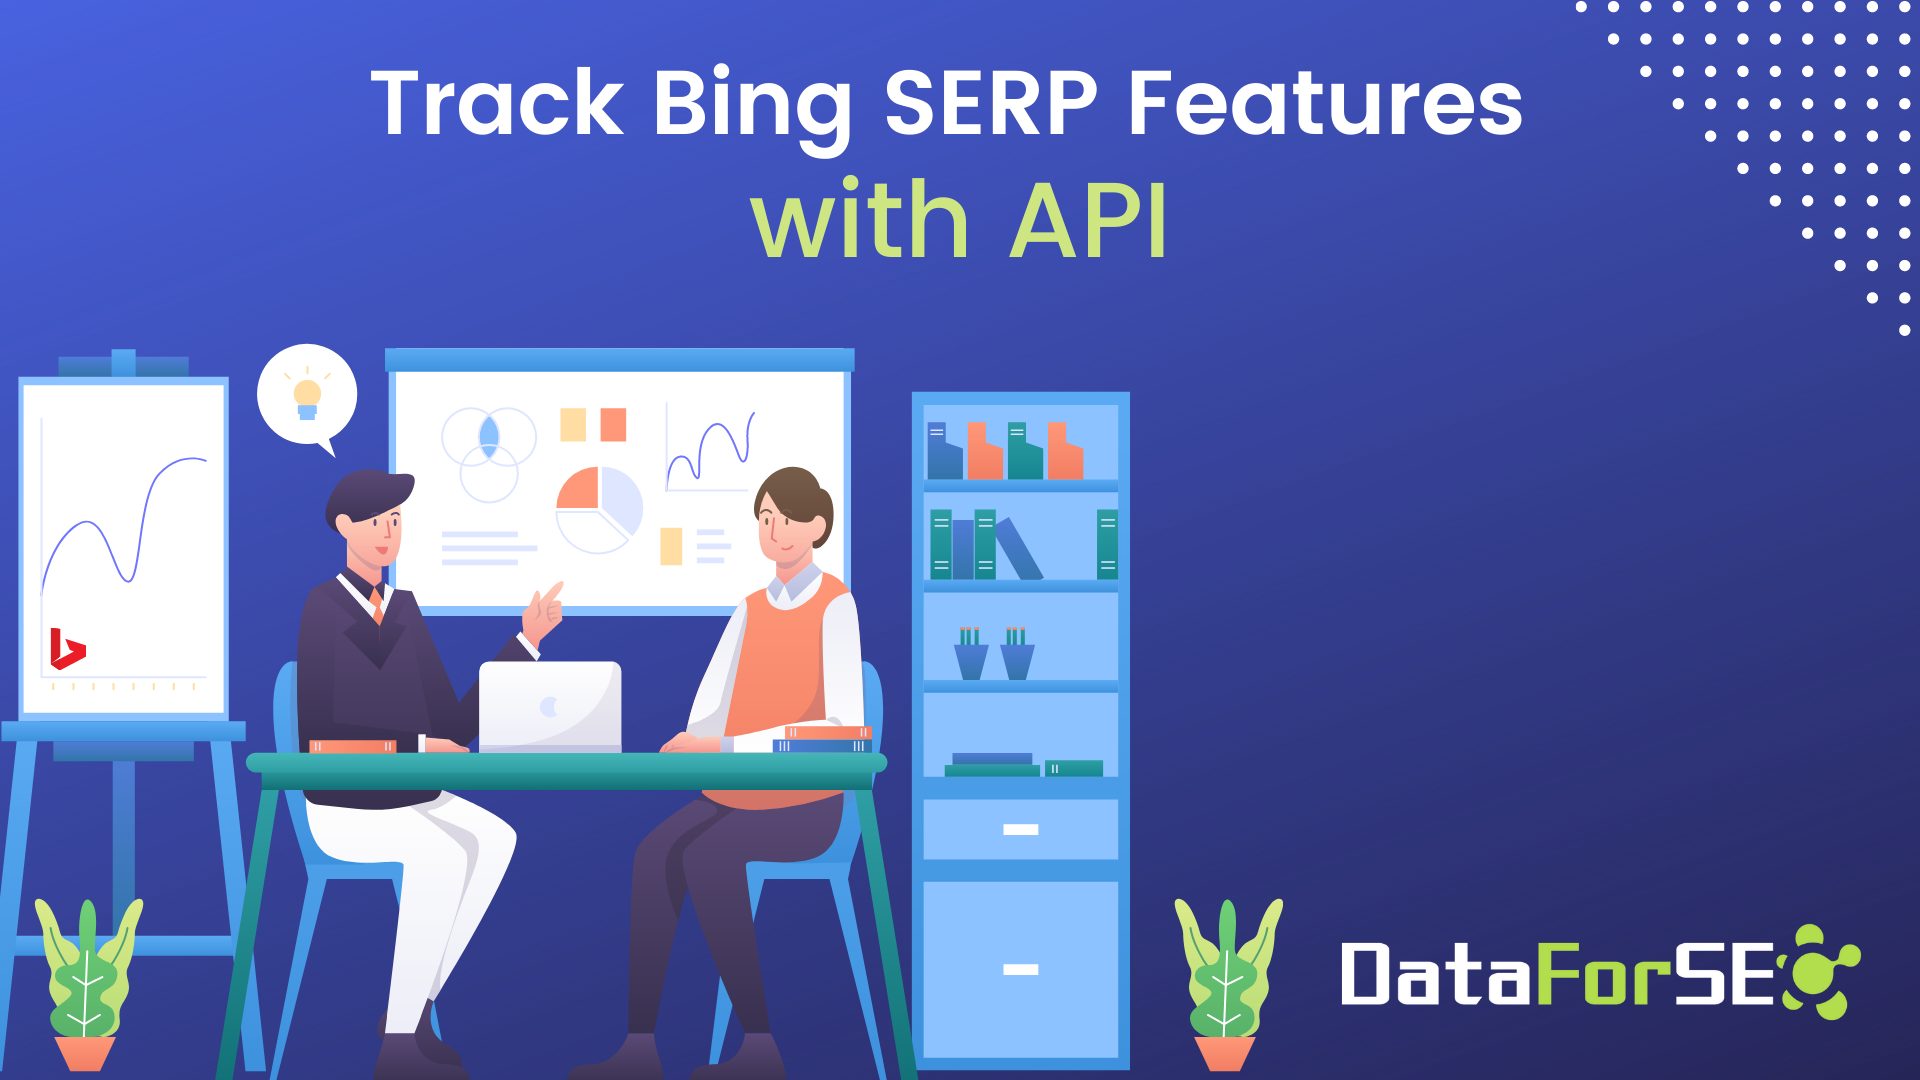 Track Bing's SERP Features with API